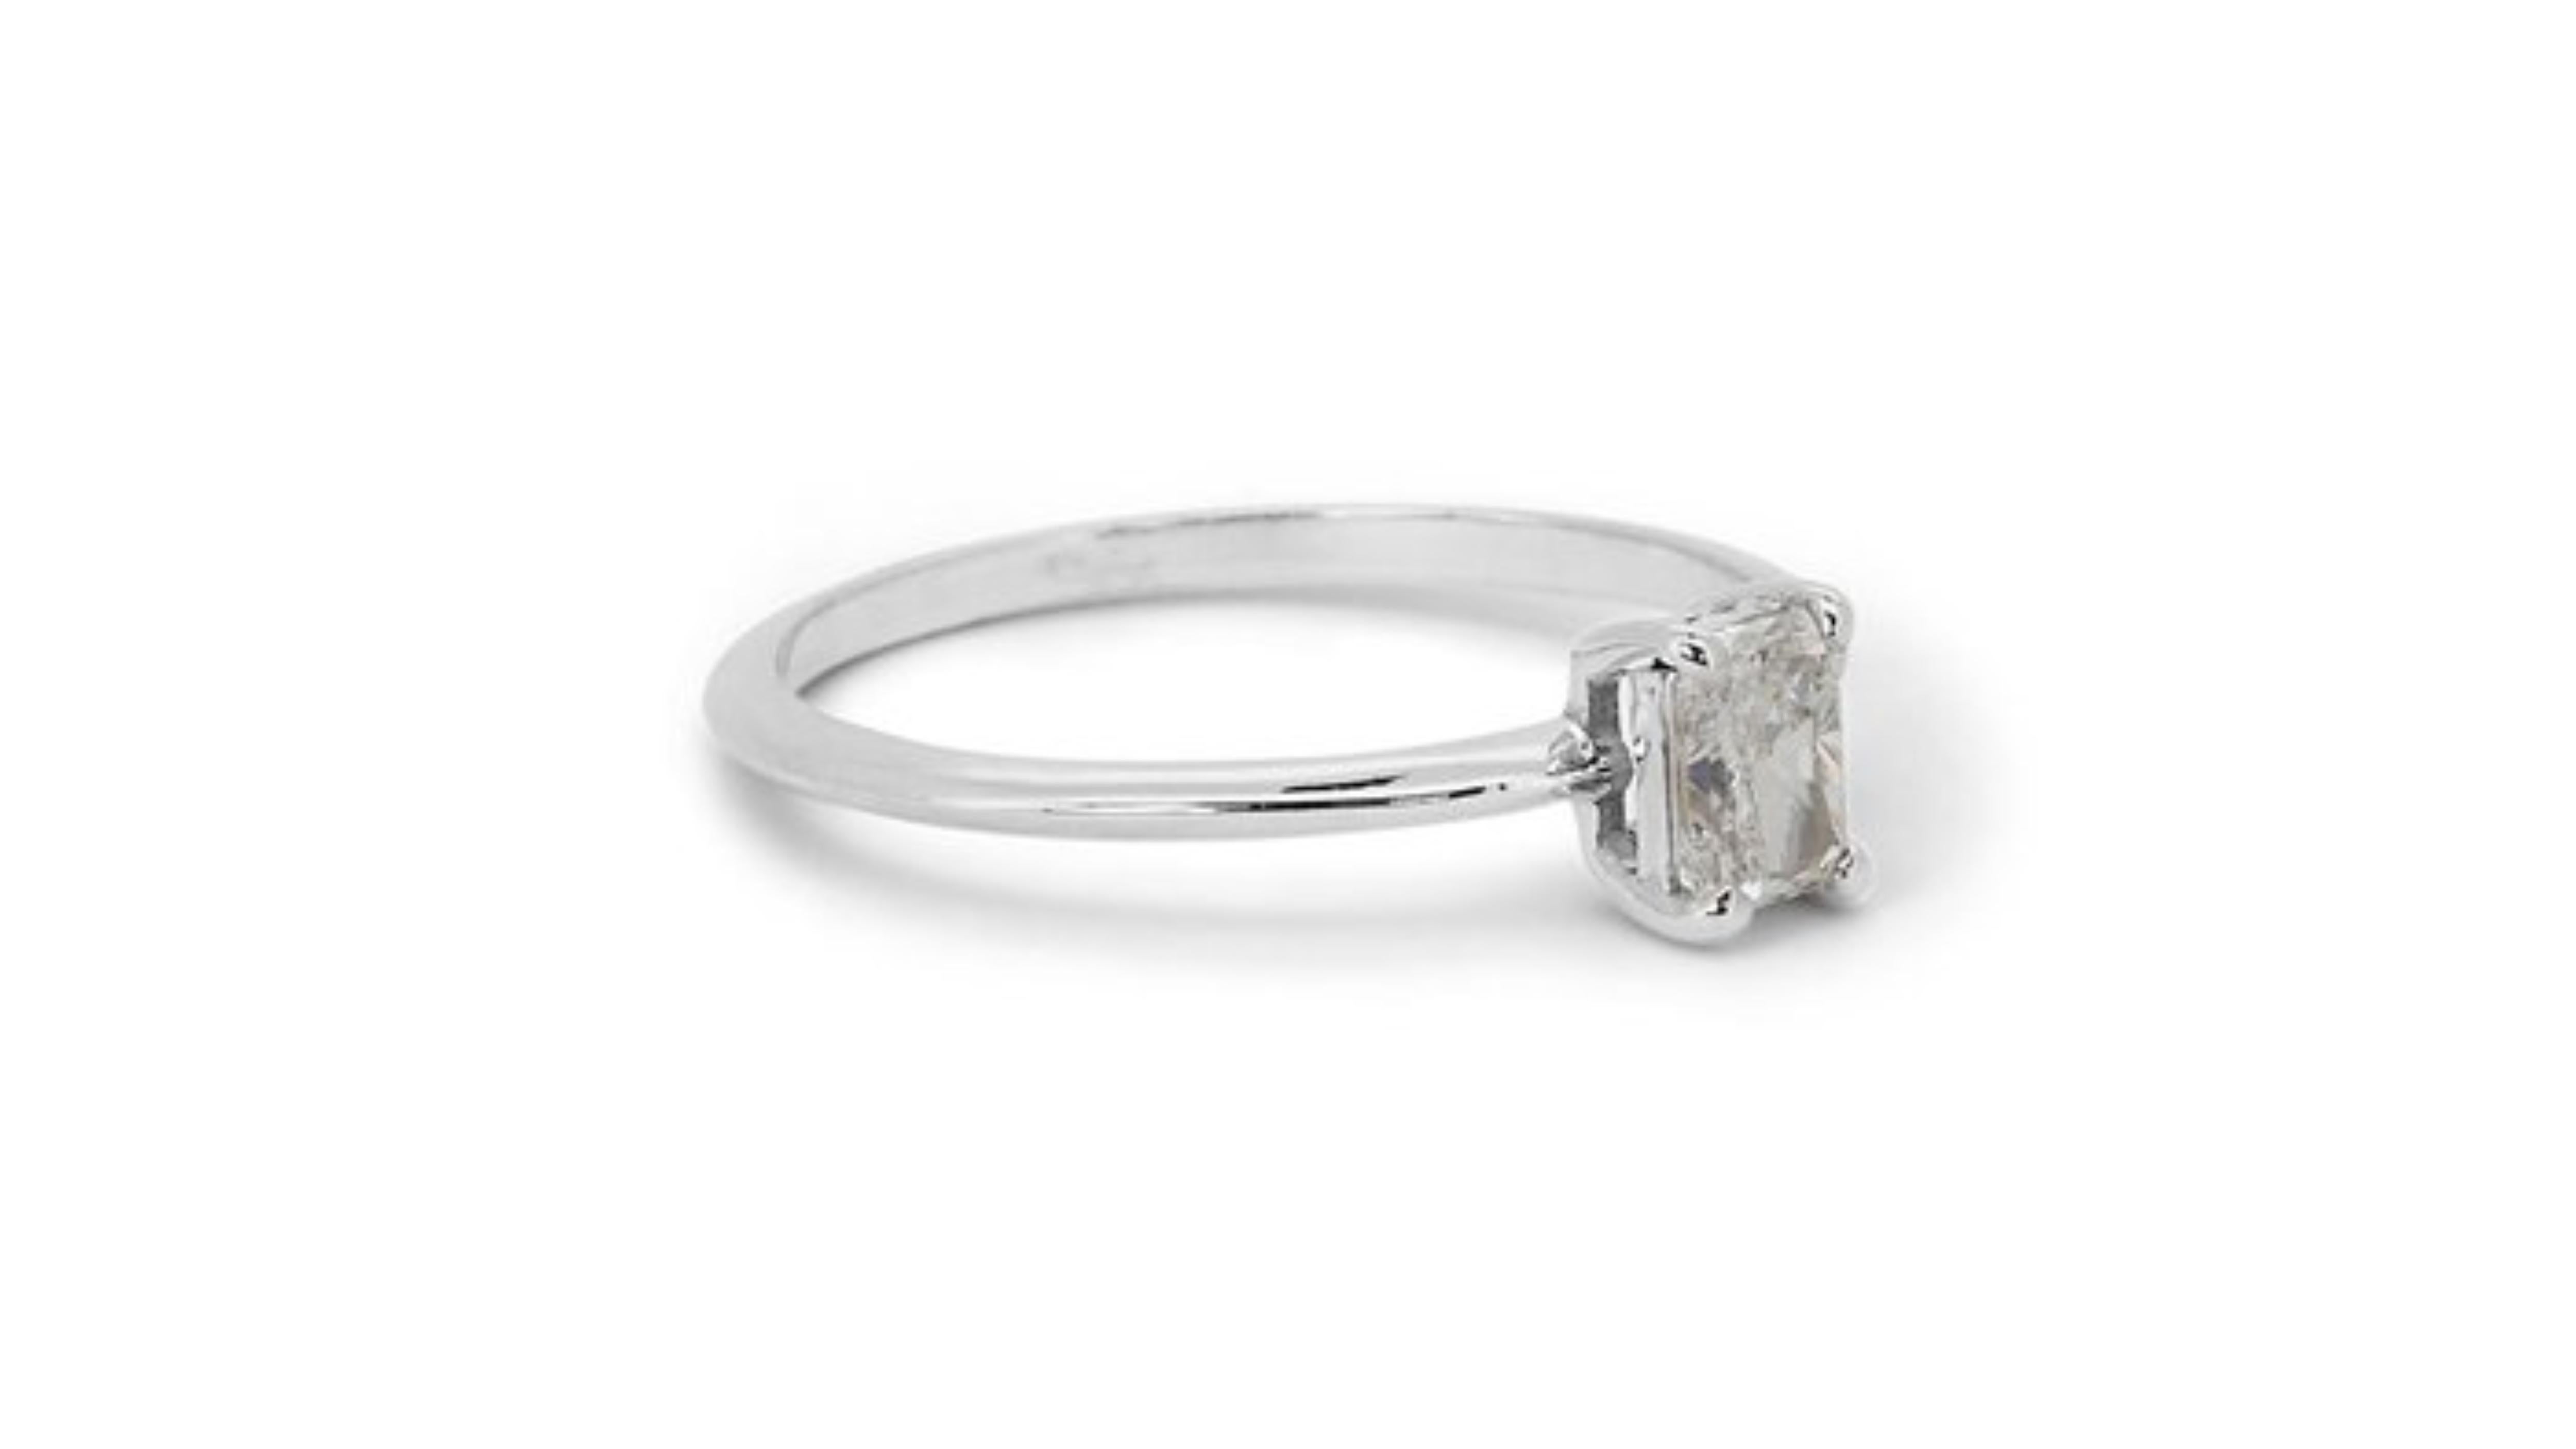 Women's Sparkling solitaire ring with a dazzling 0.80-carat radiant natural diamond